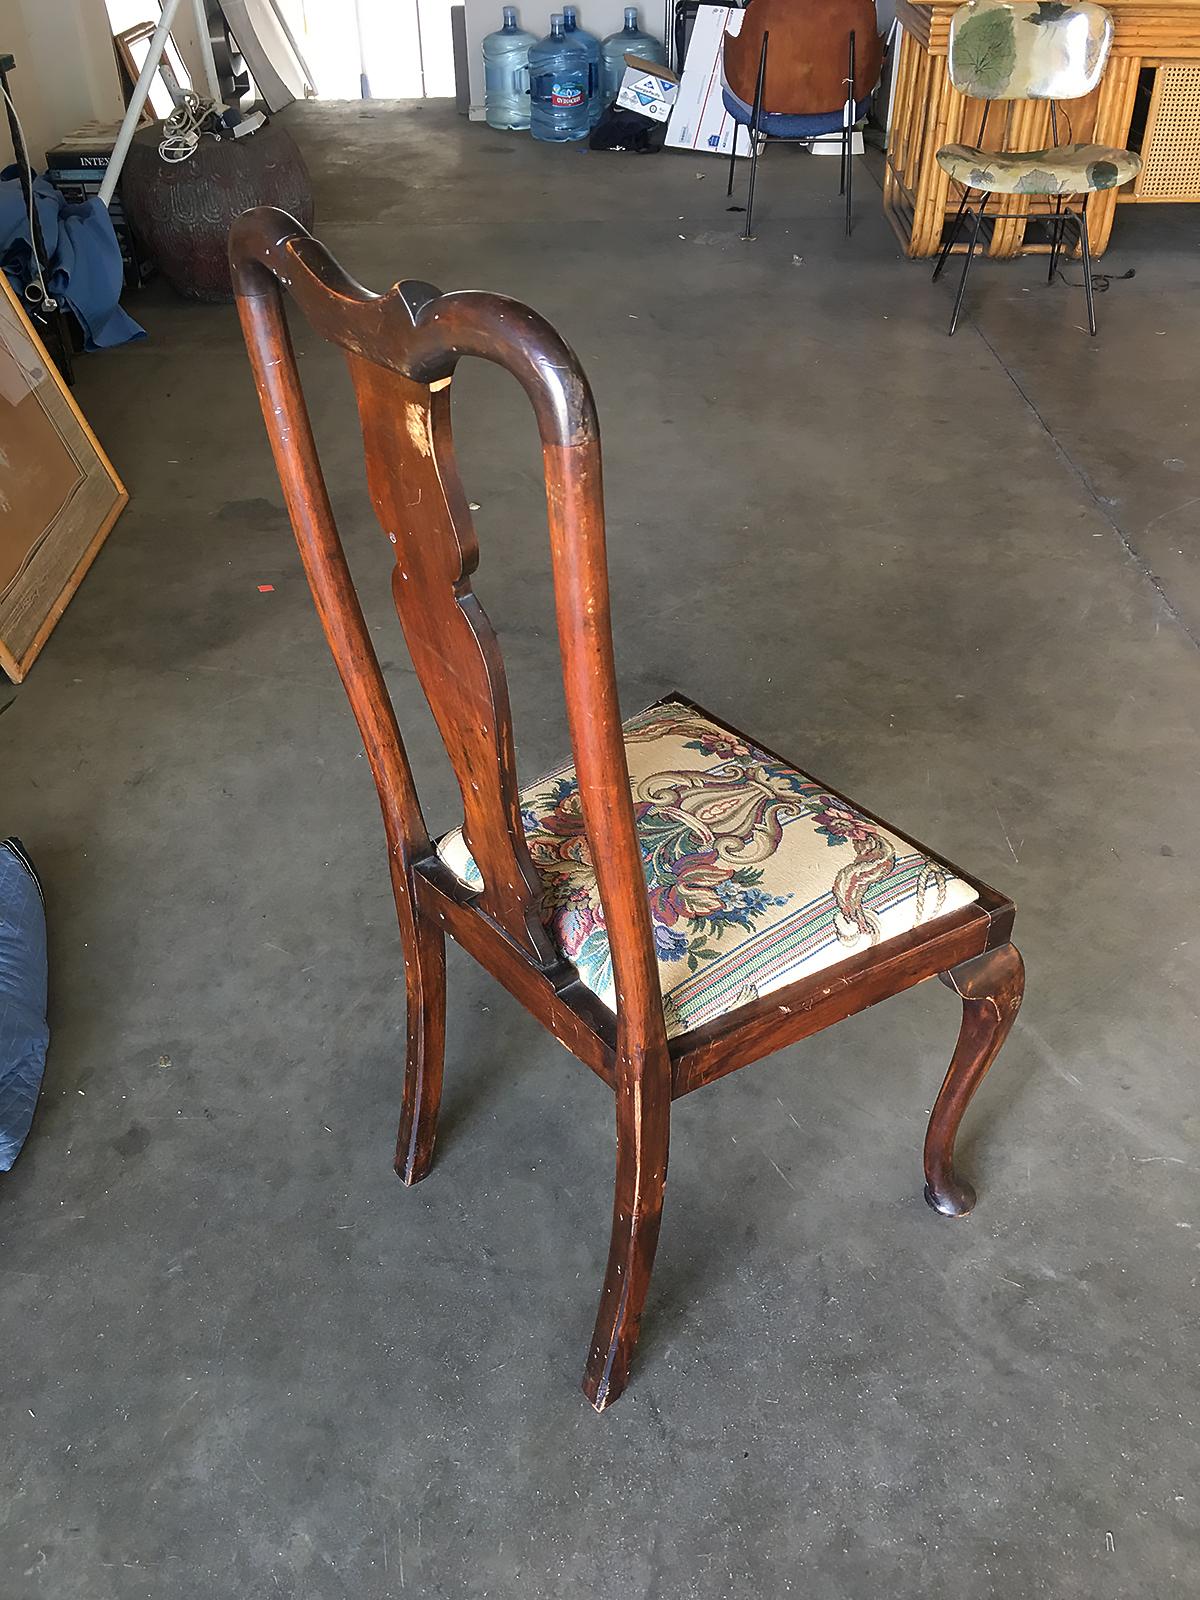 Pre-War Mahogany Art Deco Era Dining Room Chair Set of Four For Sale 1